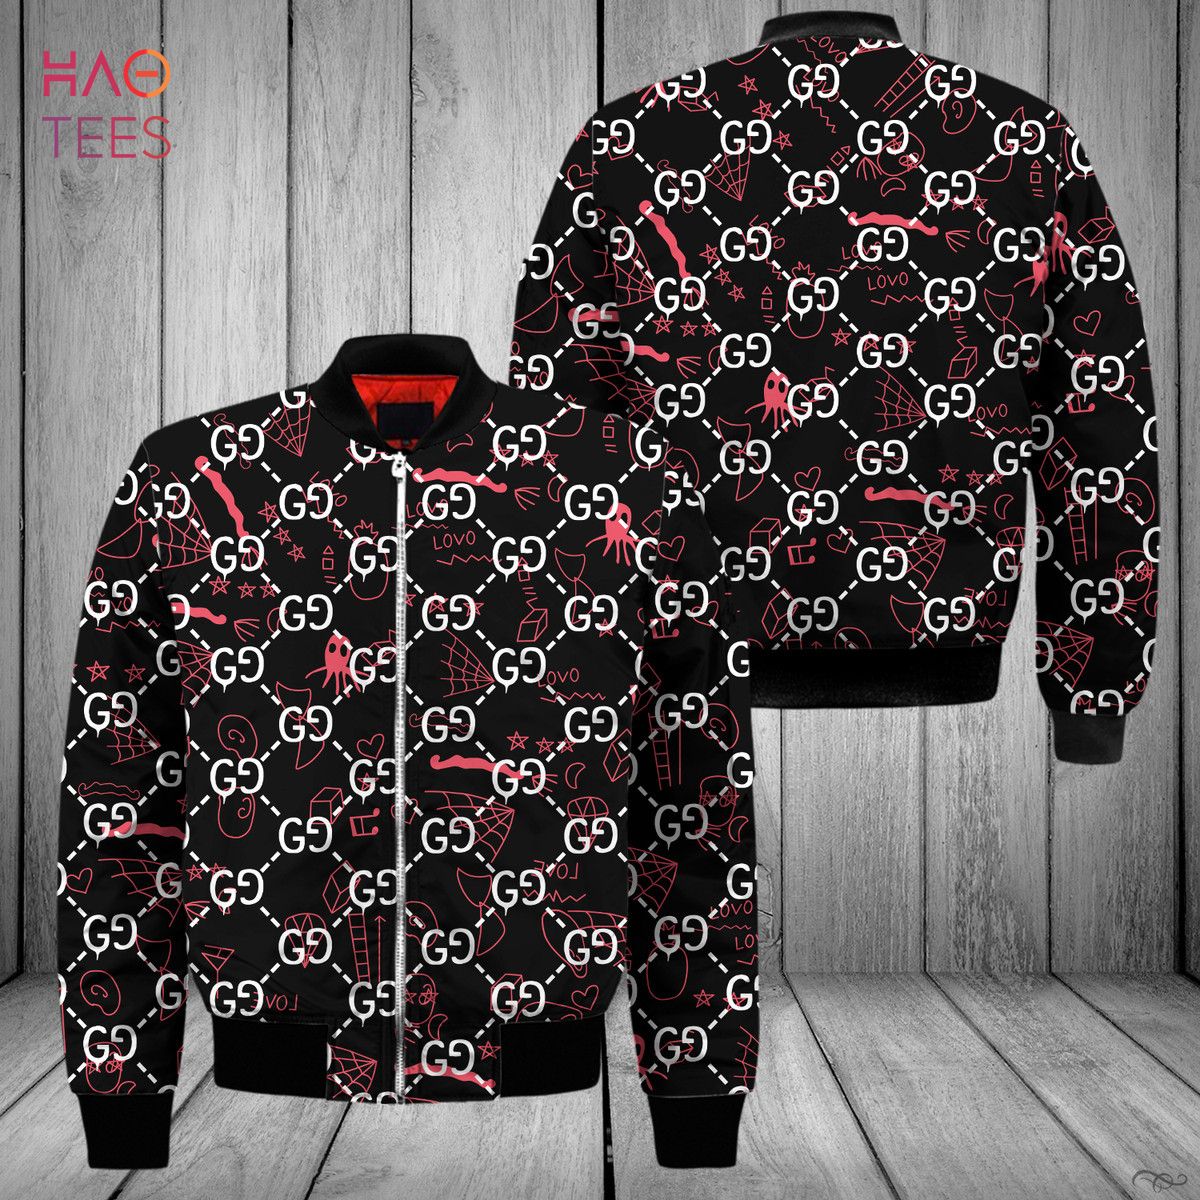 AVAILABLE Gucci Luxury Brand Black Red Bomber Jacket Limited Edition